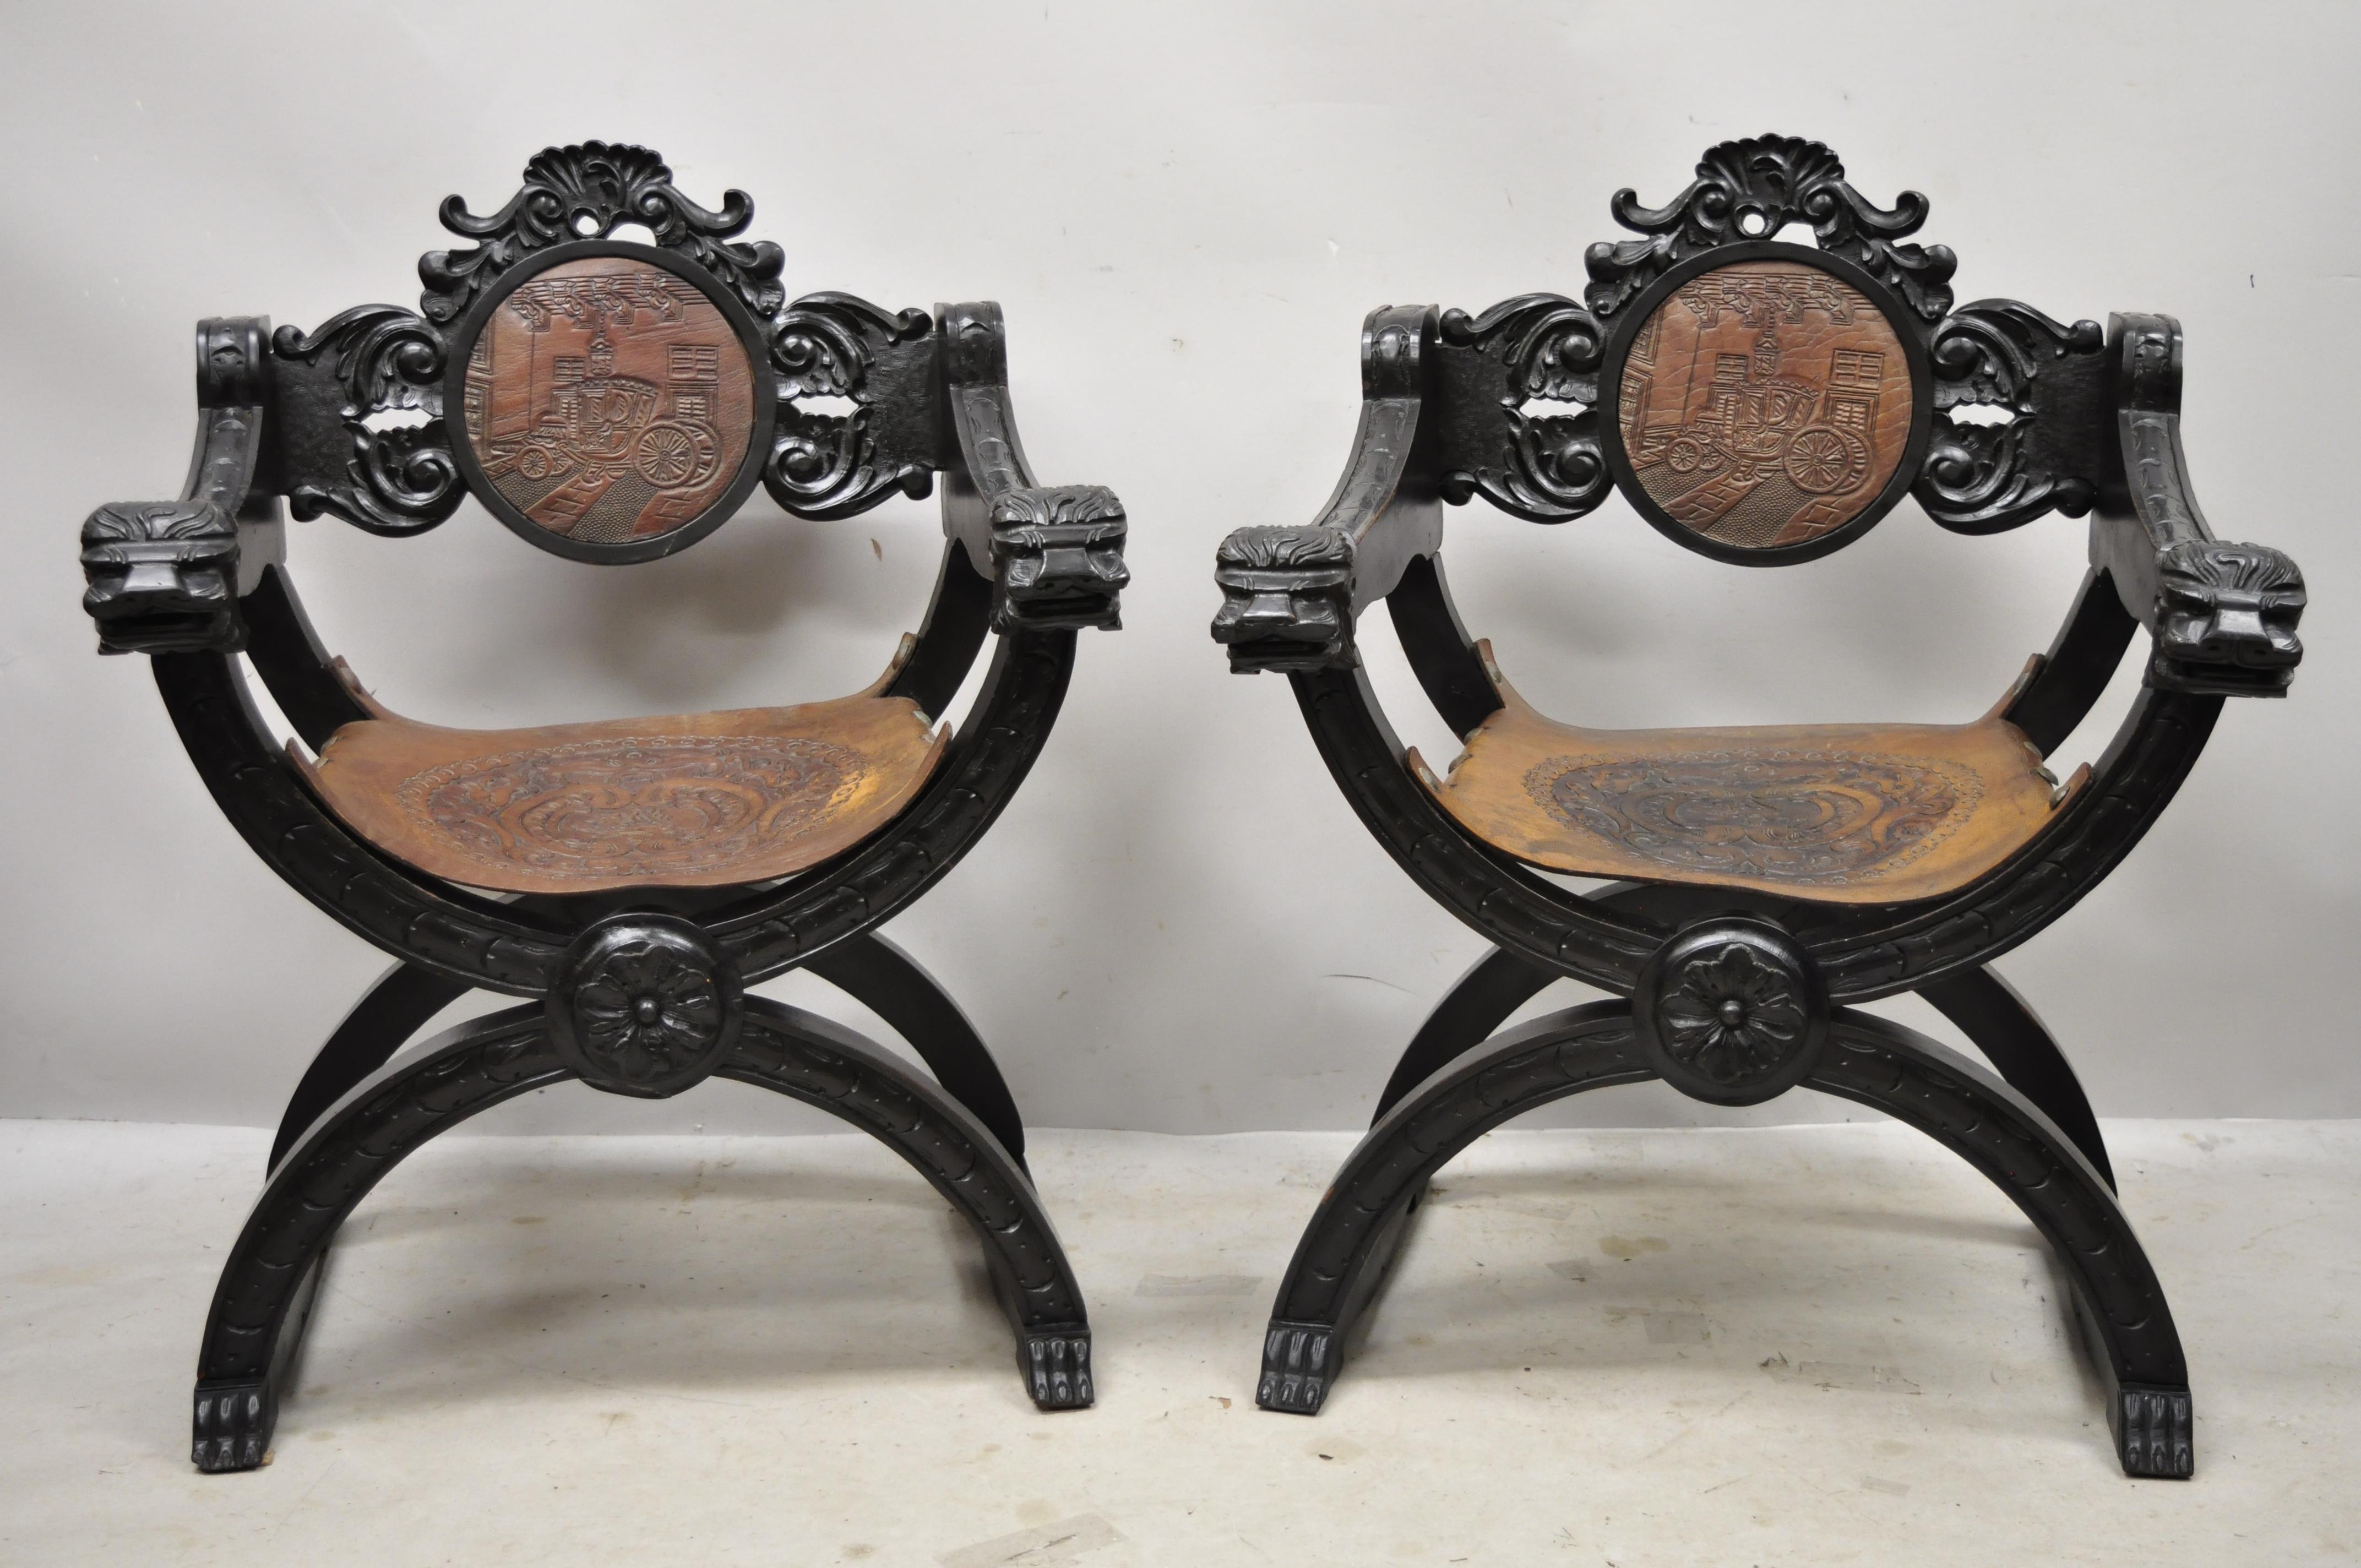 Vintage Spanish Renaissance brown leather lion carved Savonarola Throne chairs - a pair. Item features embossed detail leather sling seat and back, lion carved armrests, paw feet, solid wood construction, nicely carved details, very nice vintage